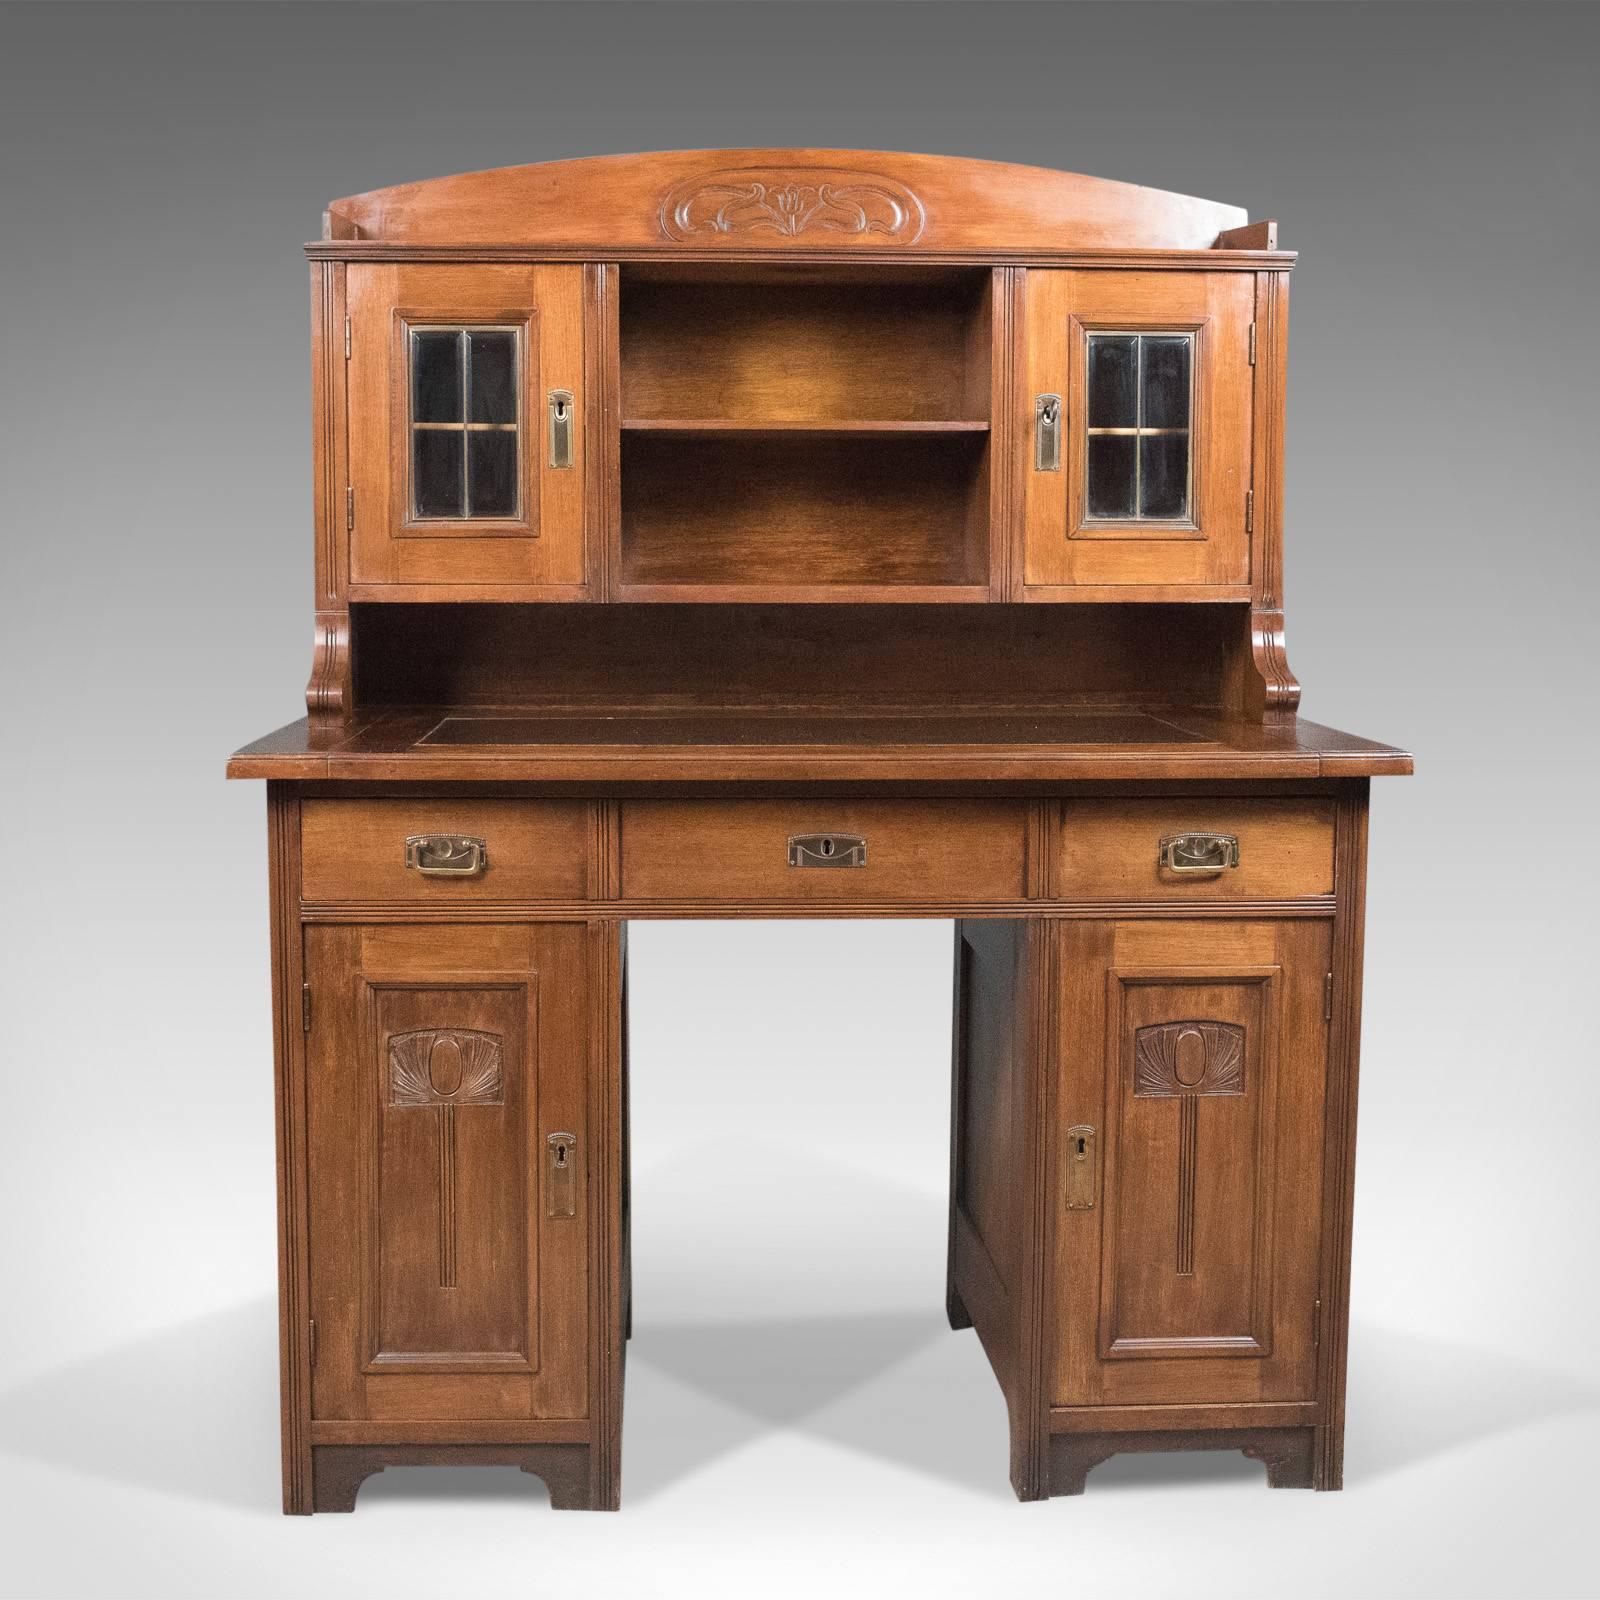 This is an antique, Art Nouveau desk, an English, Victorian, walnut cabinet, Liberty-esque in styling and dating to circa 1900.

A super piece of period Art Nouveau furniture of fine quality
Warm hues and a desirable aged patina to the walnut and